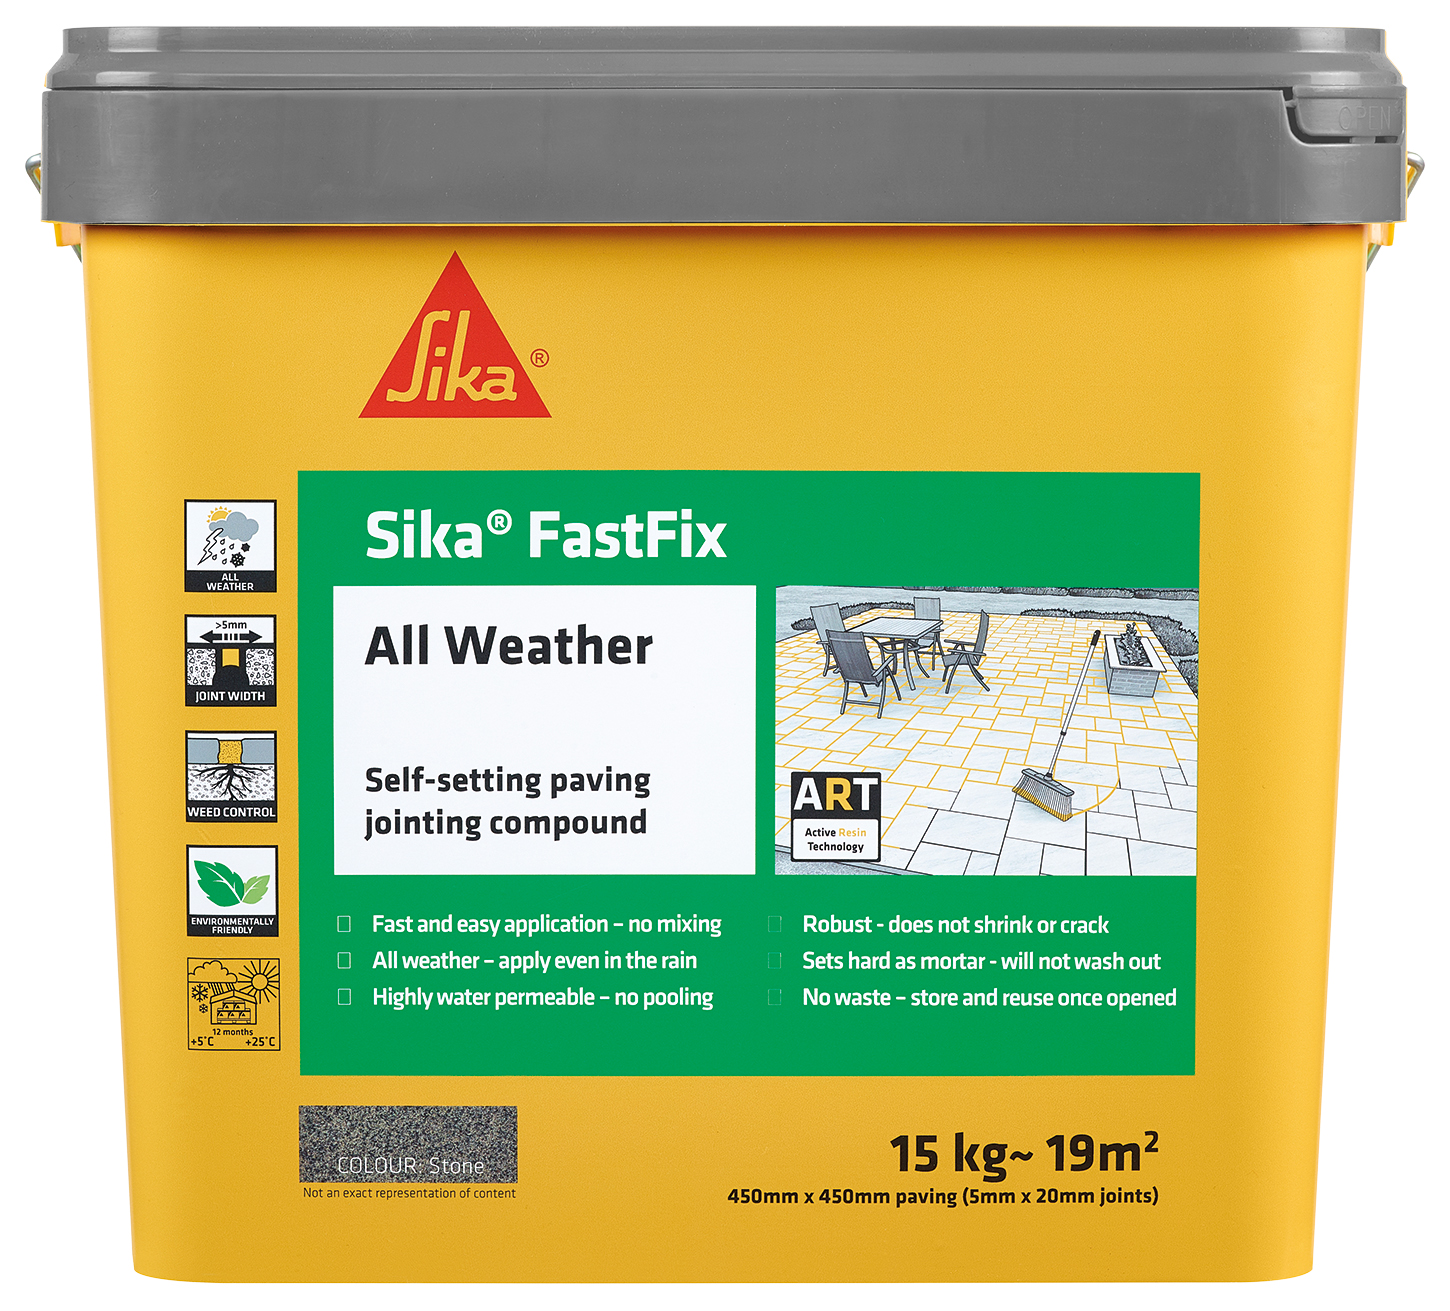 Sika FastFix All Weather Stone Paving Jointing Compound - 15 kg